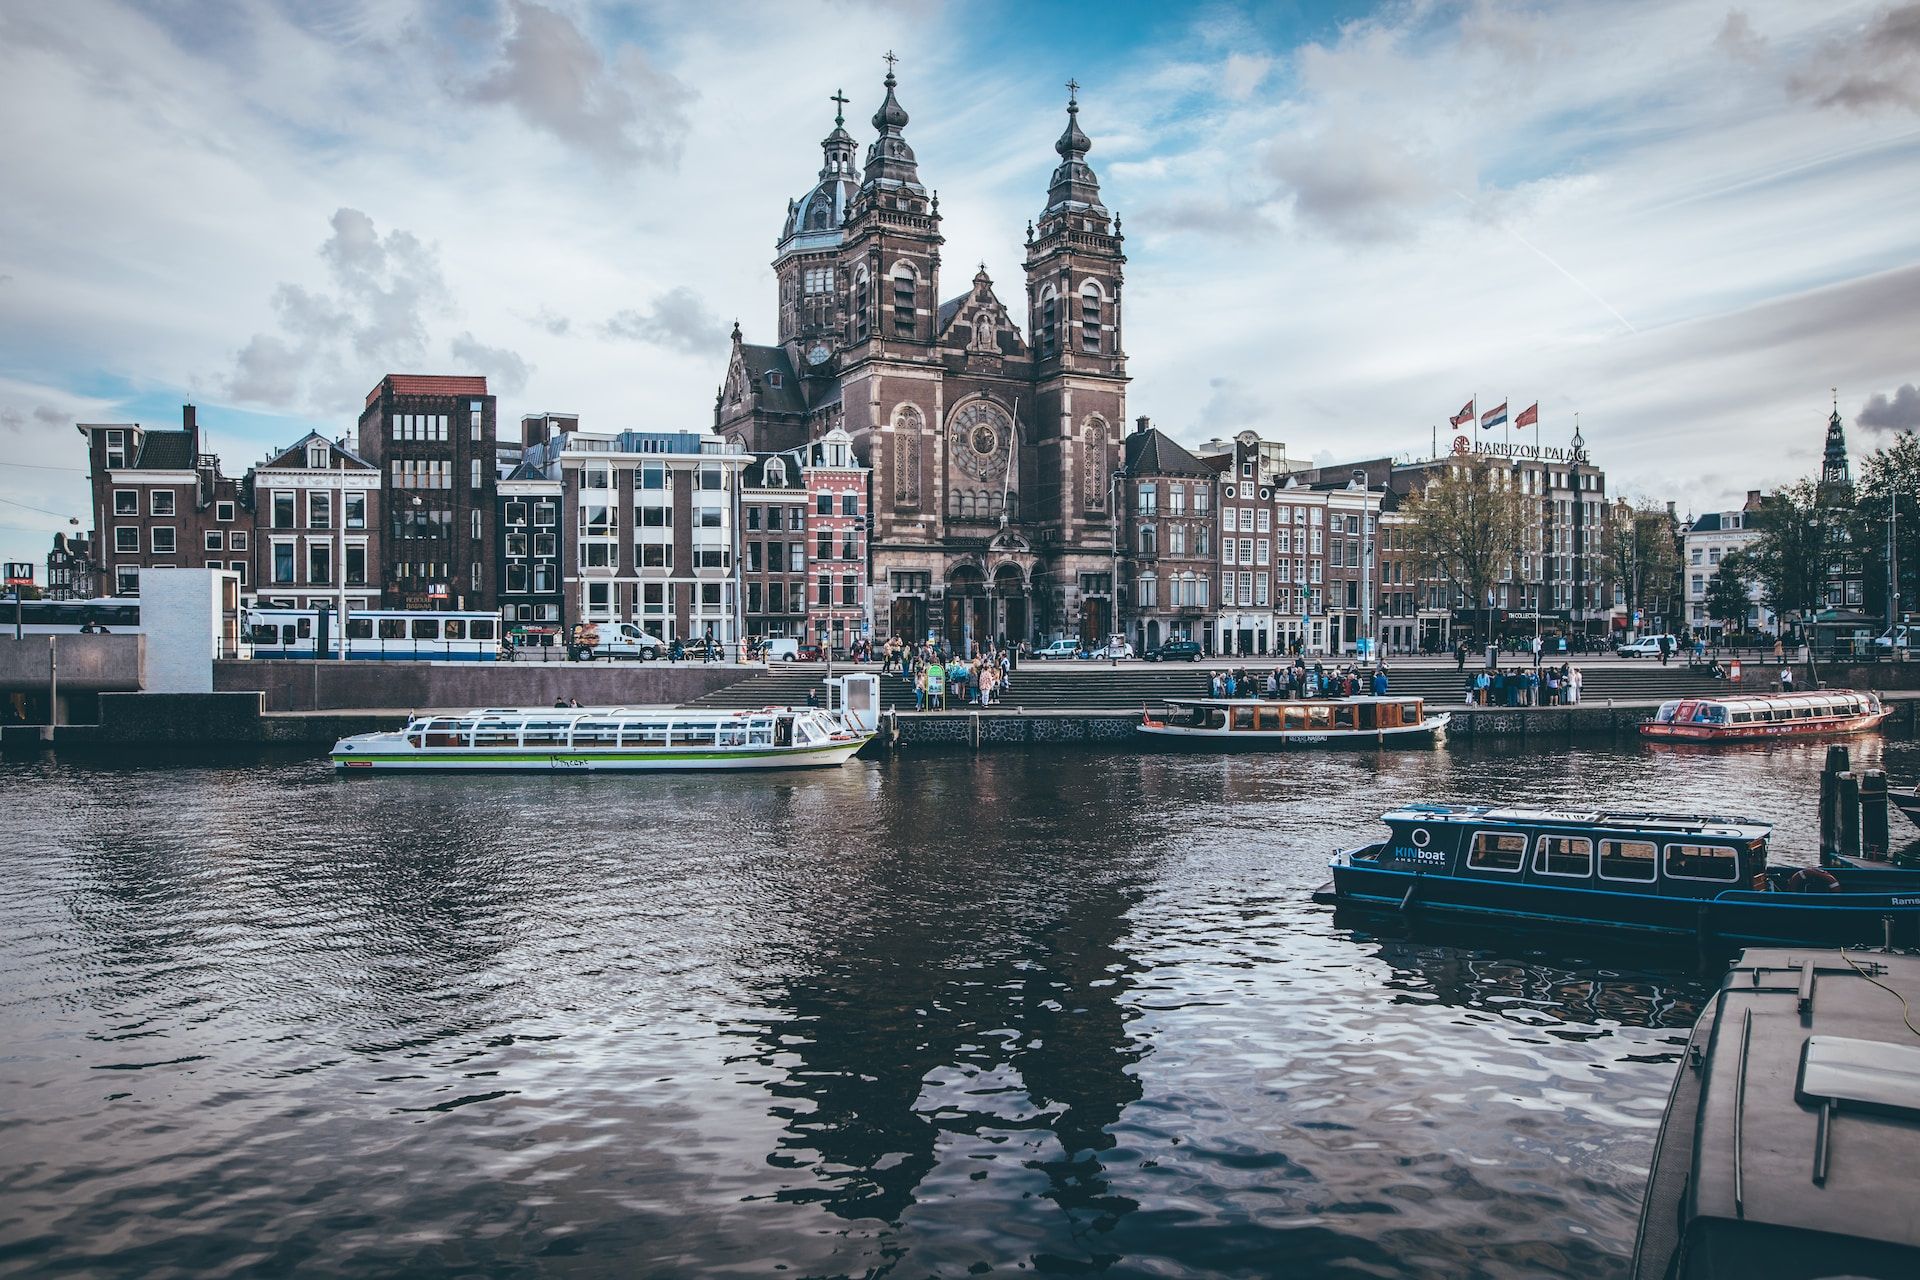 A picturesque view of Amsterdam Centraal Station.